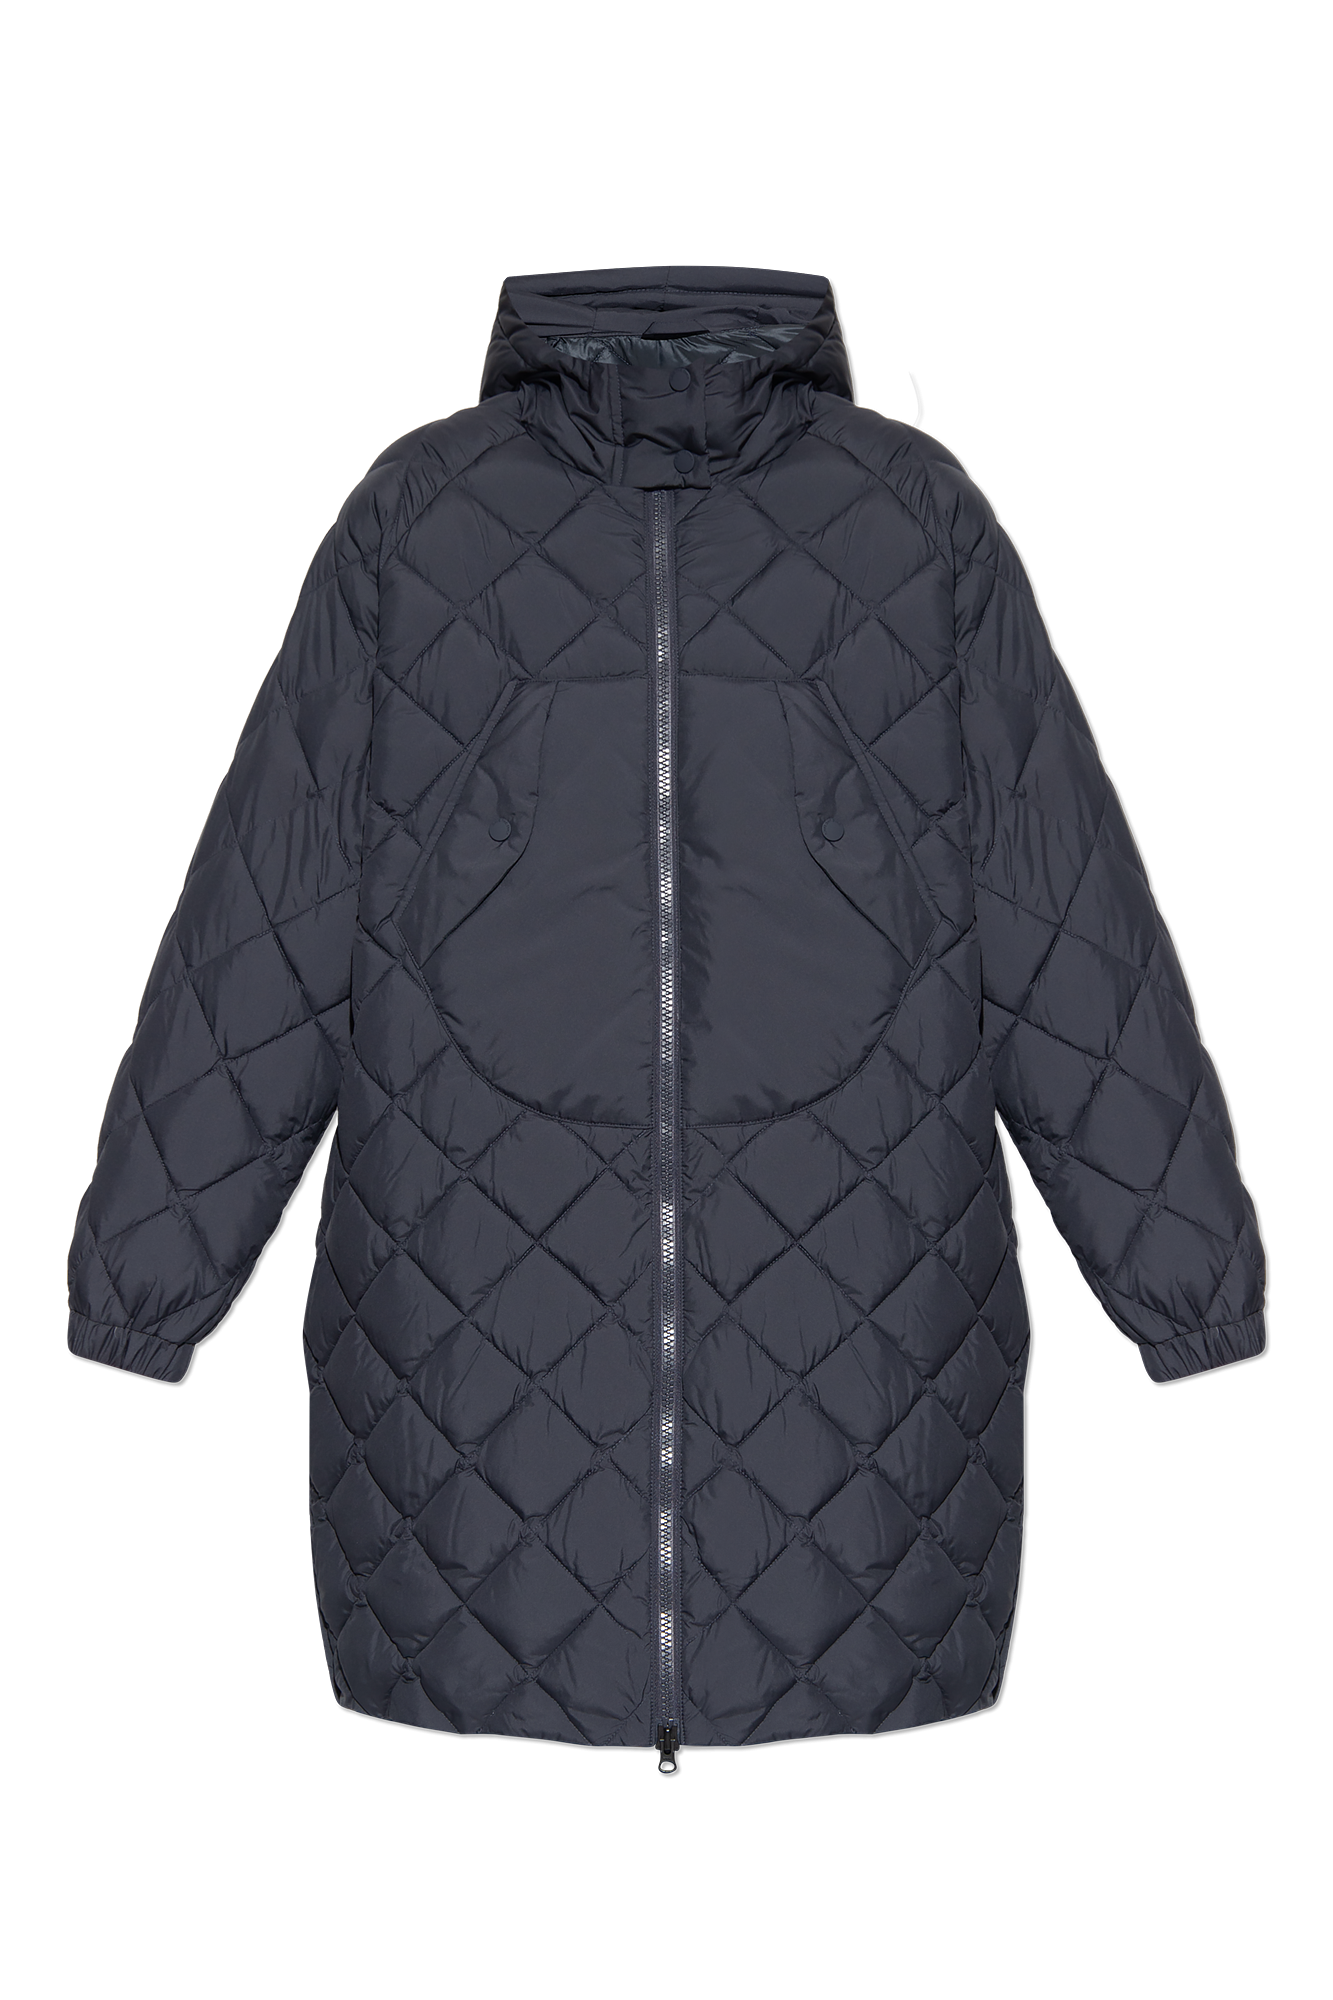 Save The Duck ‘Valerian’ quilted jacket | Women's Clothing | Vitkac